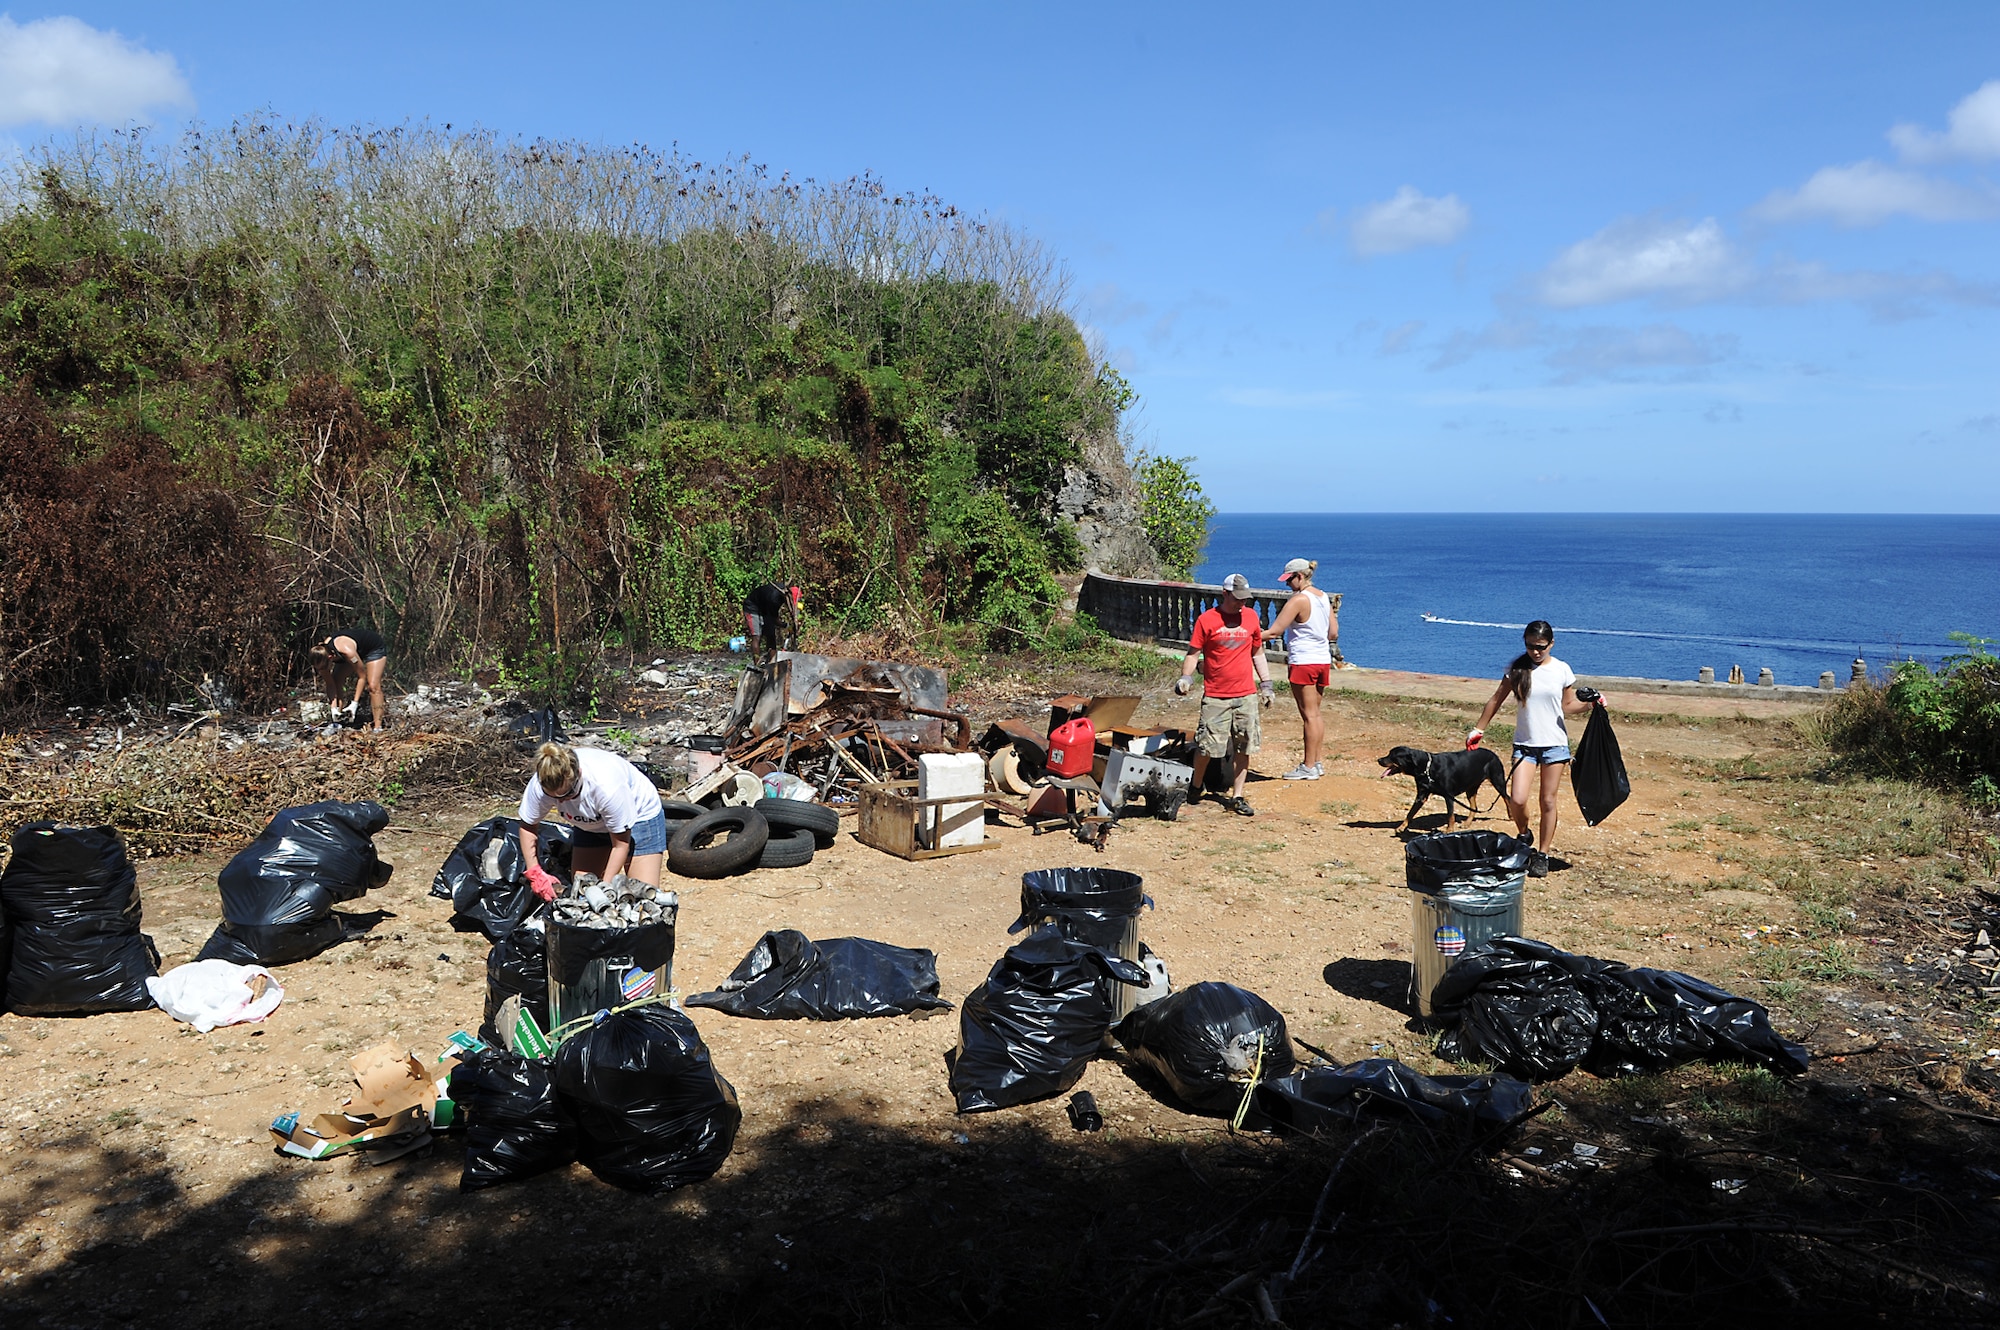 ANDERSEN AIR FORCE BASE, Guam - Junior Air Force officers from Andersen Air Force Base's Company Grade Officer Council clean up trash at a local cliffline. All told, the 13 officers and several local residents cleaned up 890 pounds of scrap metal, 315 pounds of glass, 15 bags of plastic bottles, 55 pounds of aluminum cans, and 25 bags of trash. Approximately 75 percent, by weight, of all the materials was able to be recycled locally by the group. The officers plan to return to the site once a month to perform cleanup and preventive maintenance. Anyone interested in participating can contact 2nd Lt. James Elliott at 366-2520. (U.S. Air Force photo by Tech. Sgt. Mike Andriacco)